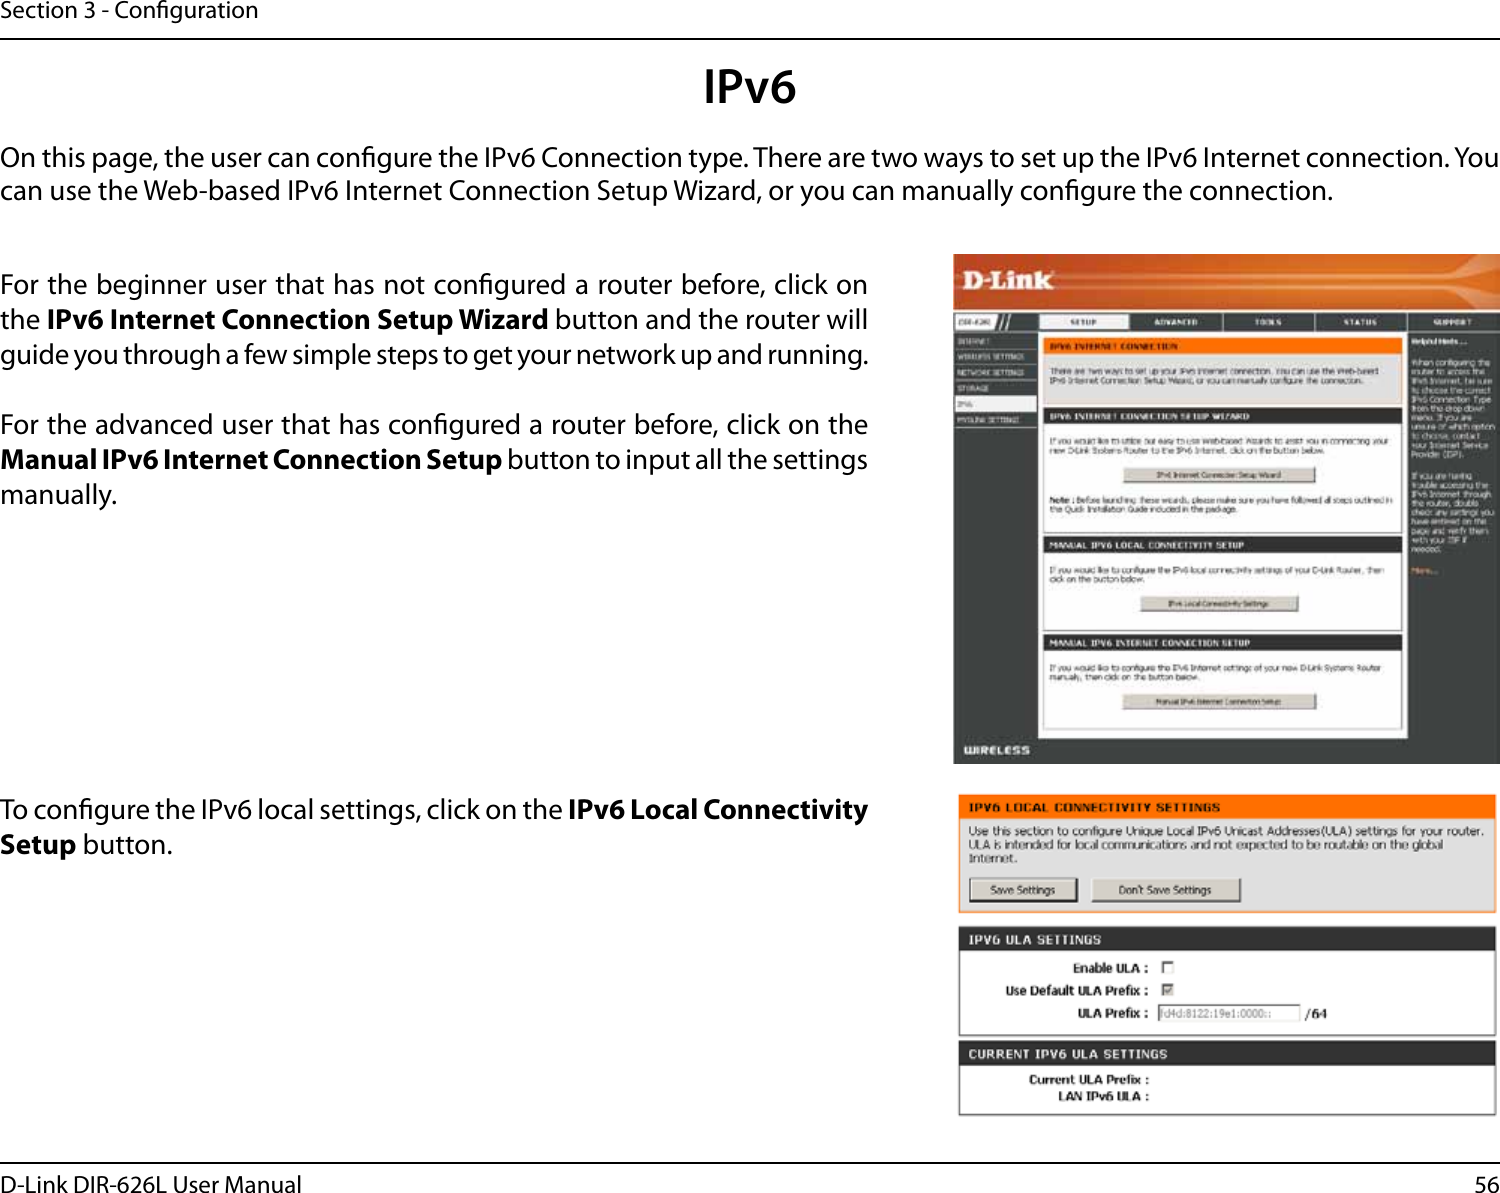 56D-Link DIR-626L User ManualSection 3 - CongurationIPv6On this page, the user can congure the IPv6 Connection type. There are two ways to set up the IPv6 Internet connection. You can use the Web-based IPv6 Internet Connection Setup Wizard, or you can manually congure the connection.For the beginner user that has not congured a router before, click on the IPv6 Internet Connection Setup Wizard button and the router will guide you through a few simple steps to get your network up and running.For the advanced user that has congured a router before, click on the Manual IPv6 Internet Connection Setup button to input all the settings manually.To congure the IPv6 local settings, click on the IPv6 Local Connectivity Setup button.